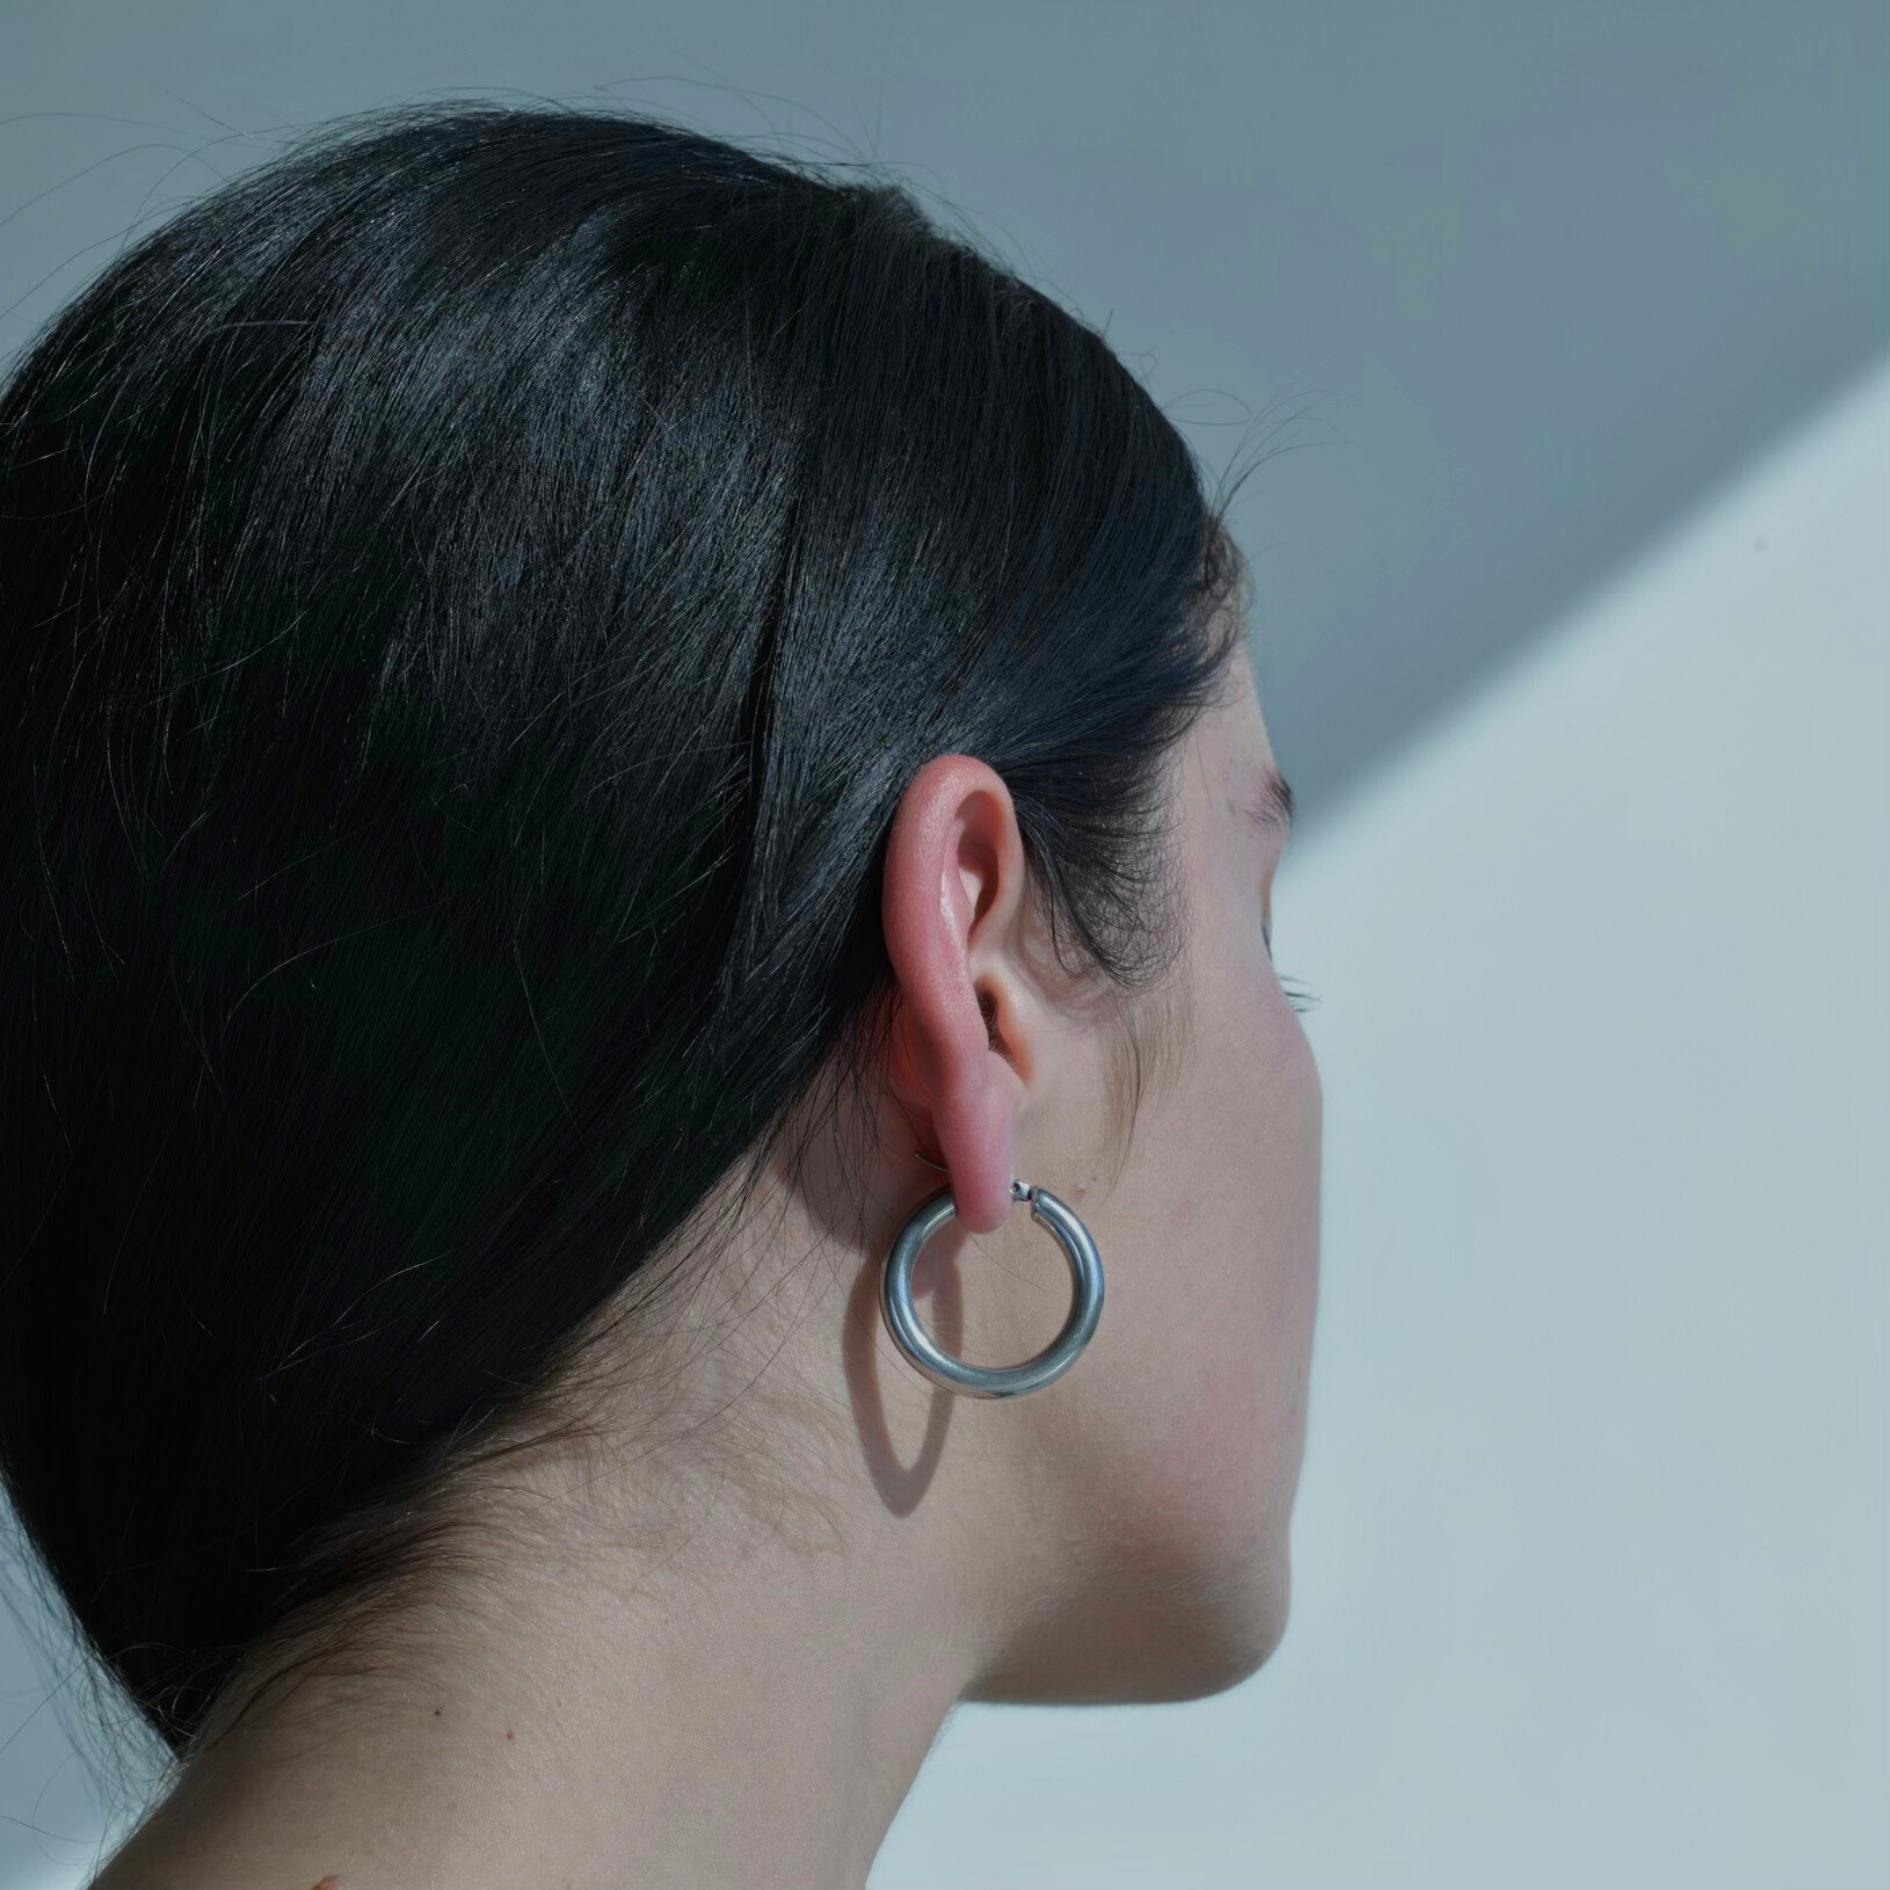 woman model wearing in her ear Classic silver plated hoop earrings Round circle earrings with a silver plating.